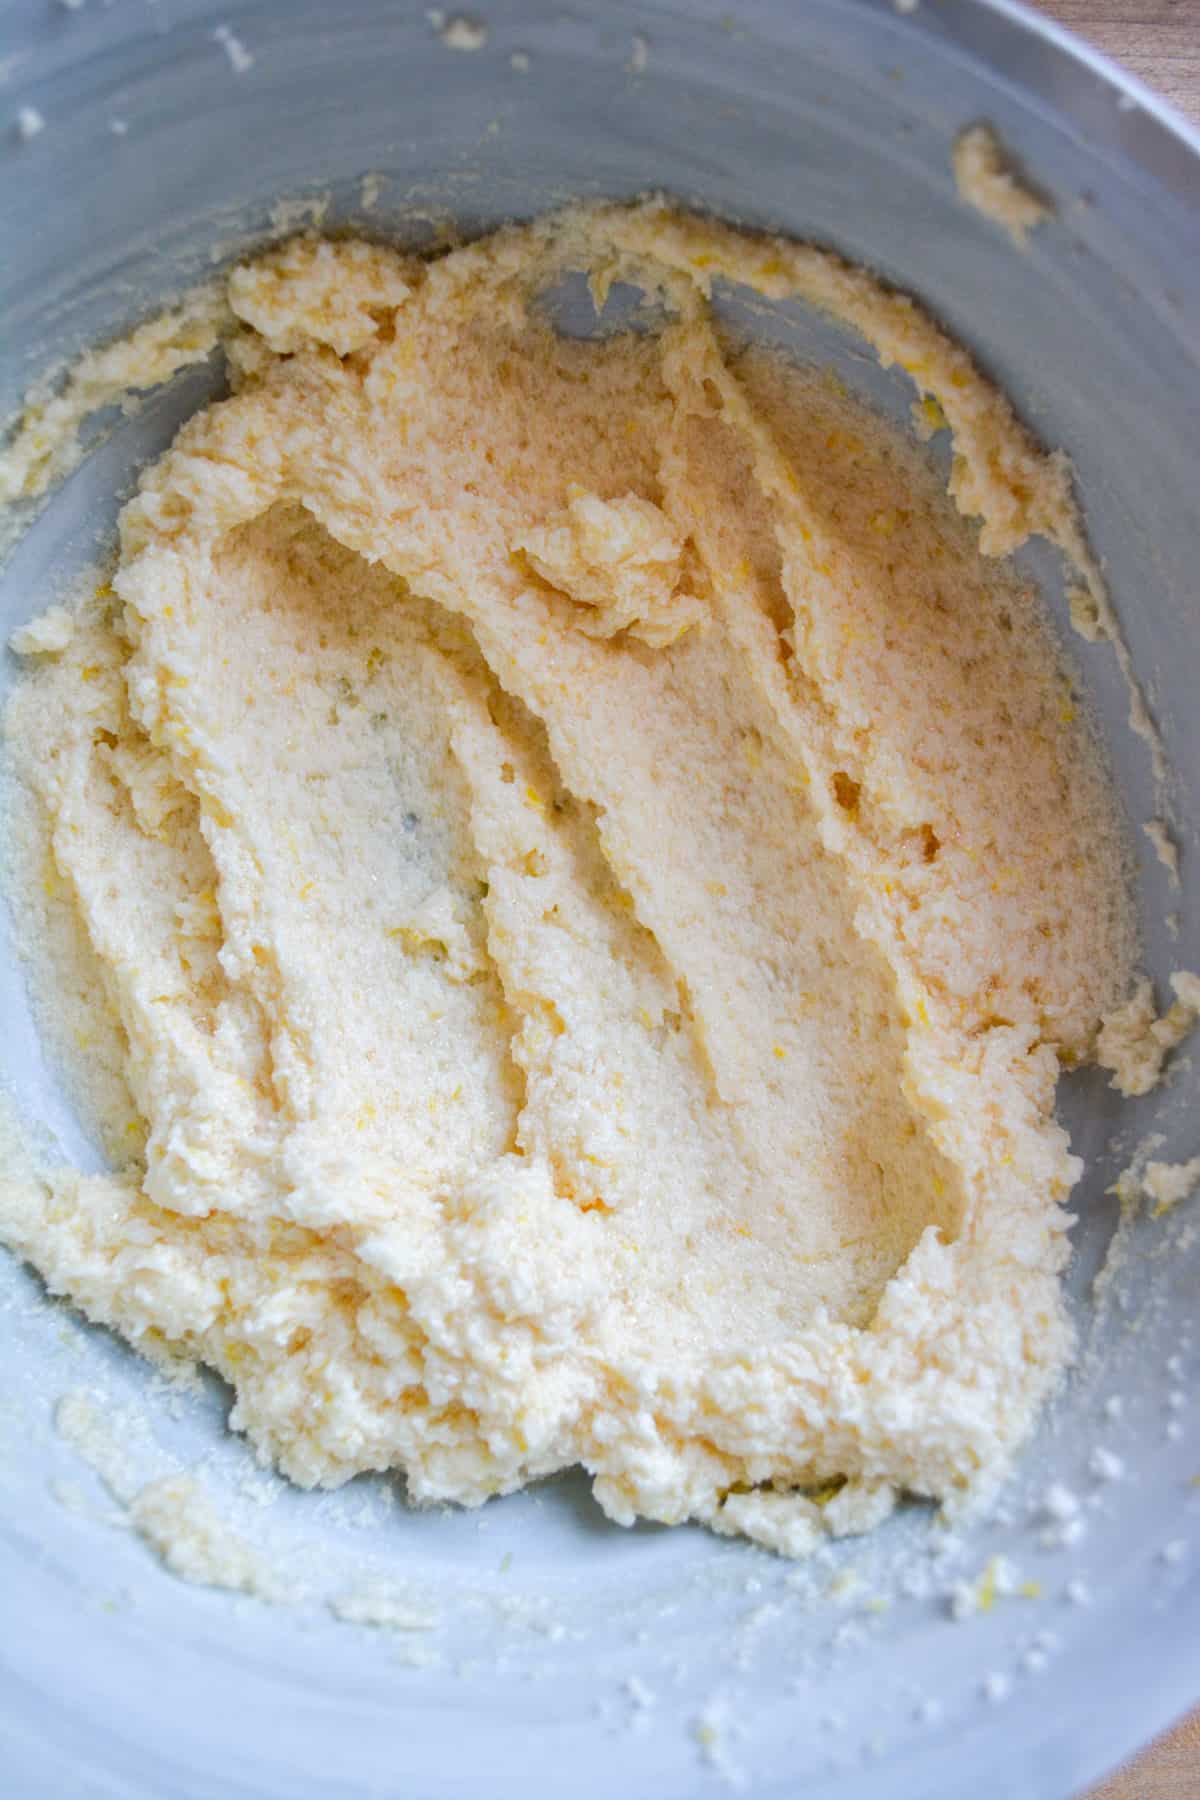 Non-dairy milk and vanilla mixed into the butter mixture.